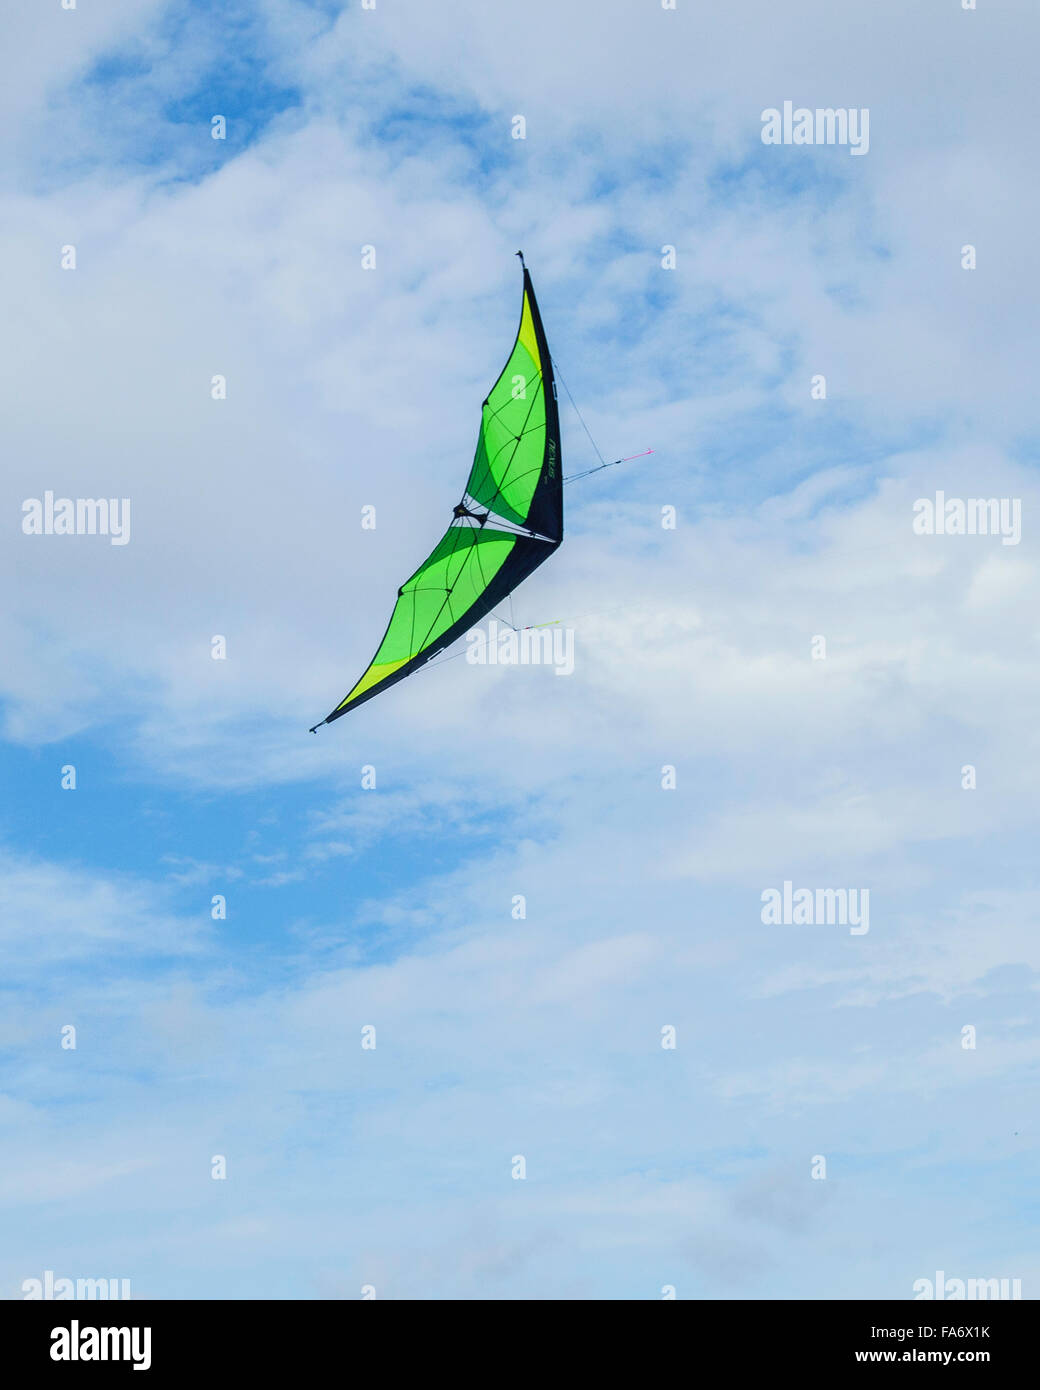 A black and green dart-shaped kite soaring against a sky of blue with clouds. Stock Photo